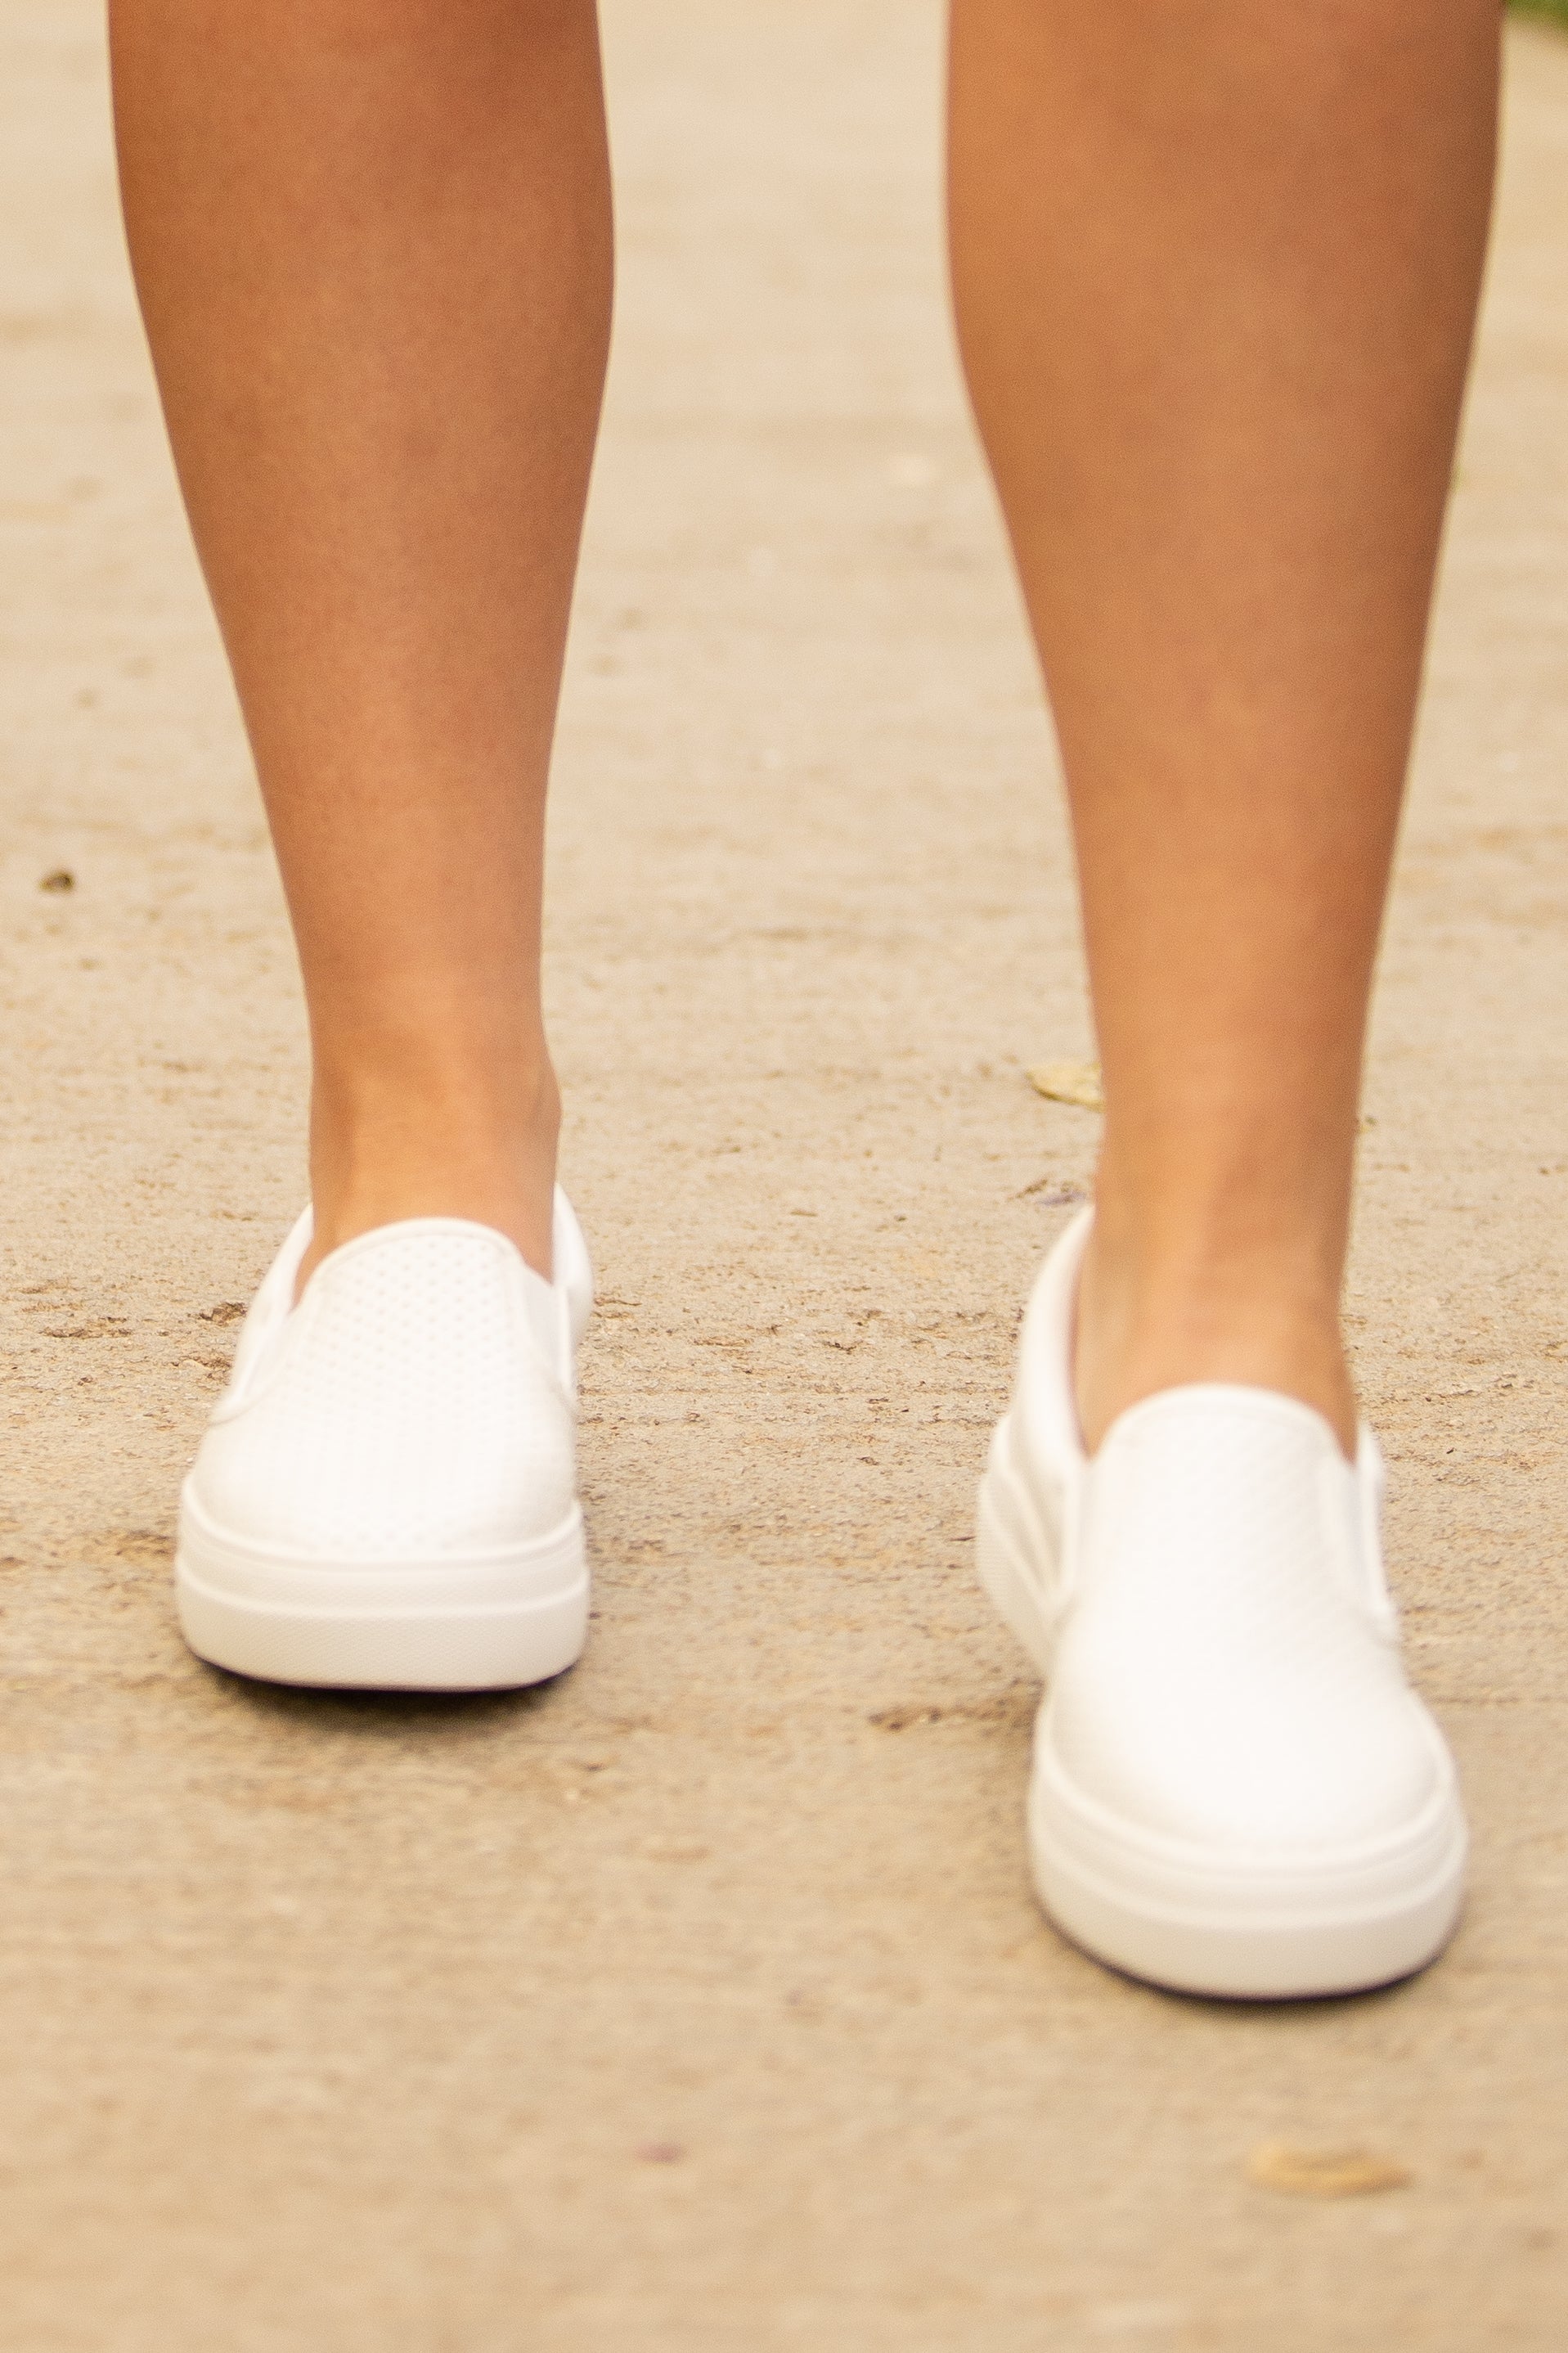 Slip Into Style Slip On Sneakers - White Accessories Boutique Simplified